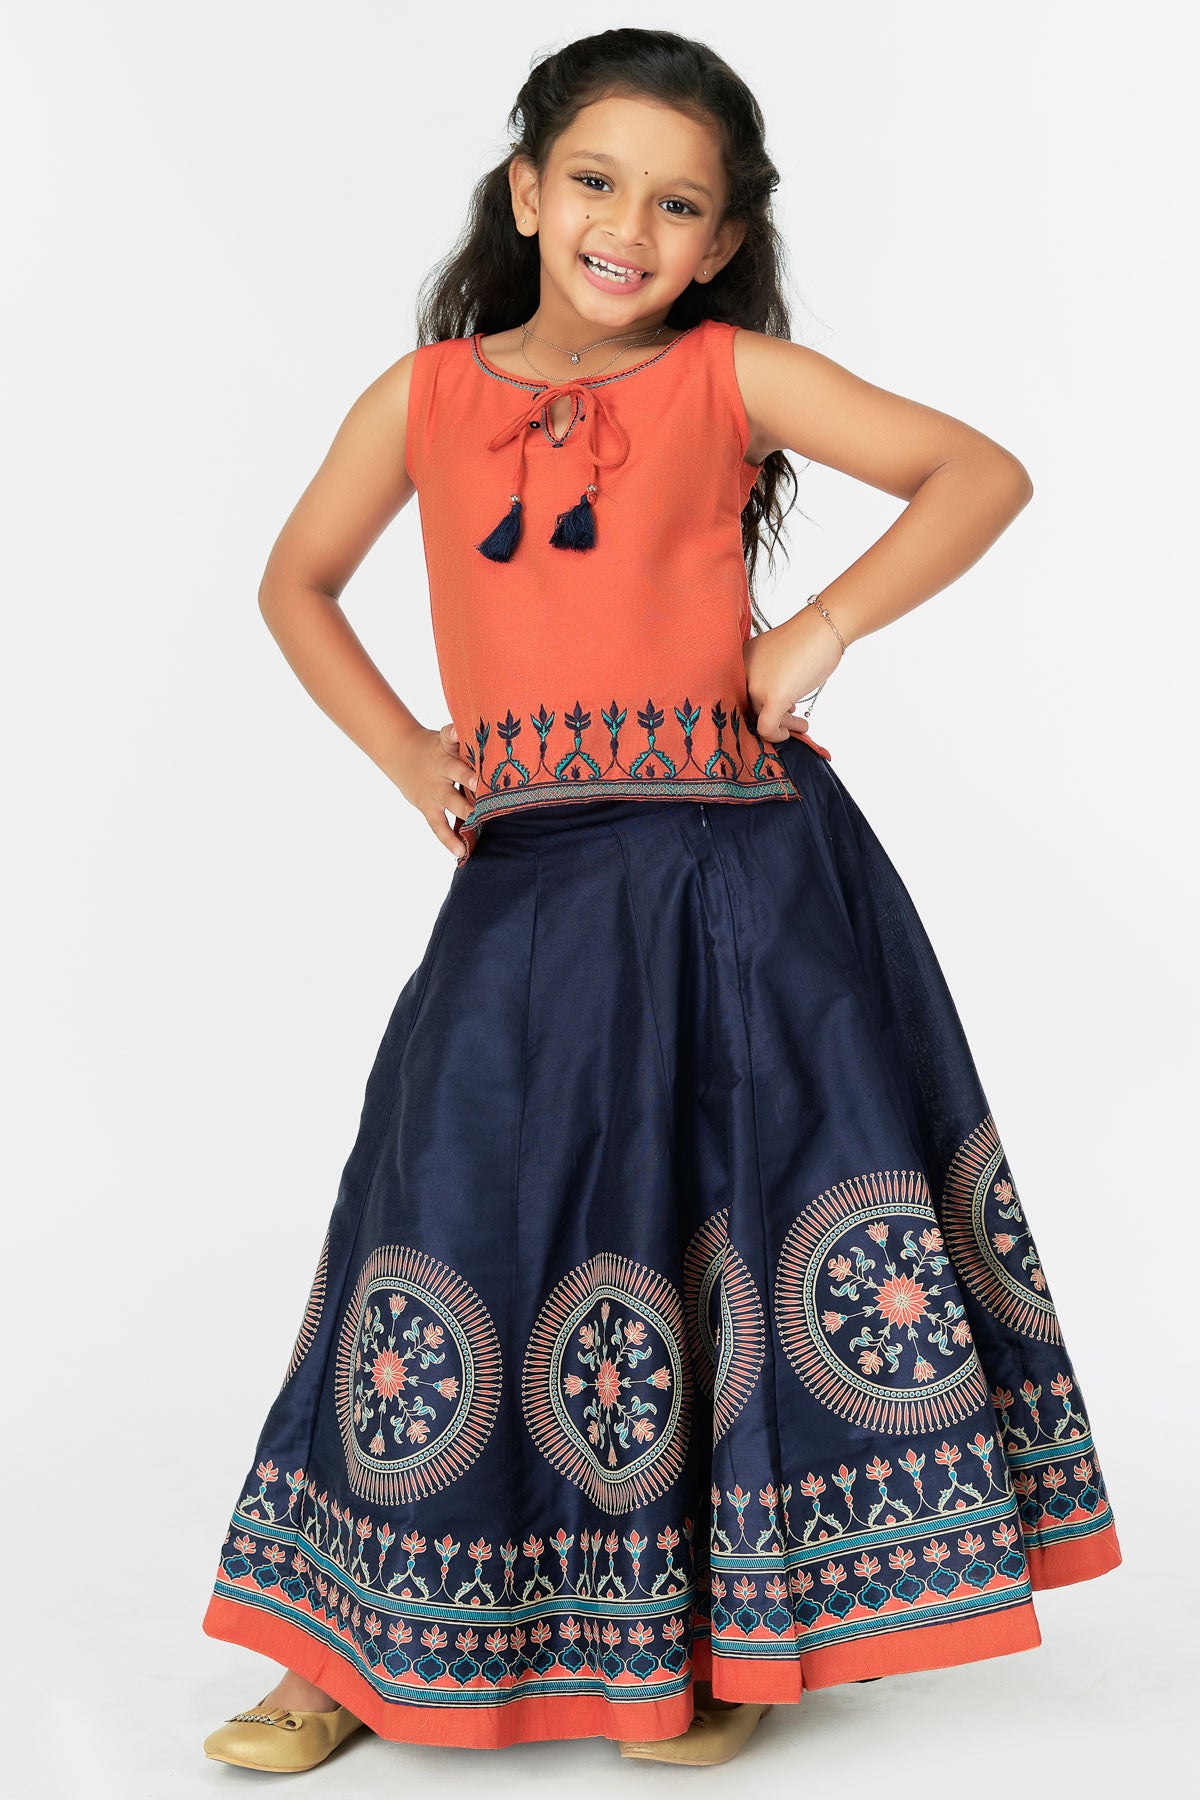 Contrast Geometric Embroidered Sleeveless Top & Floral Printed Skirt Set - Orange & Navy Blue